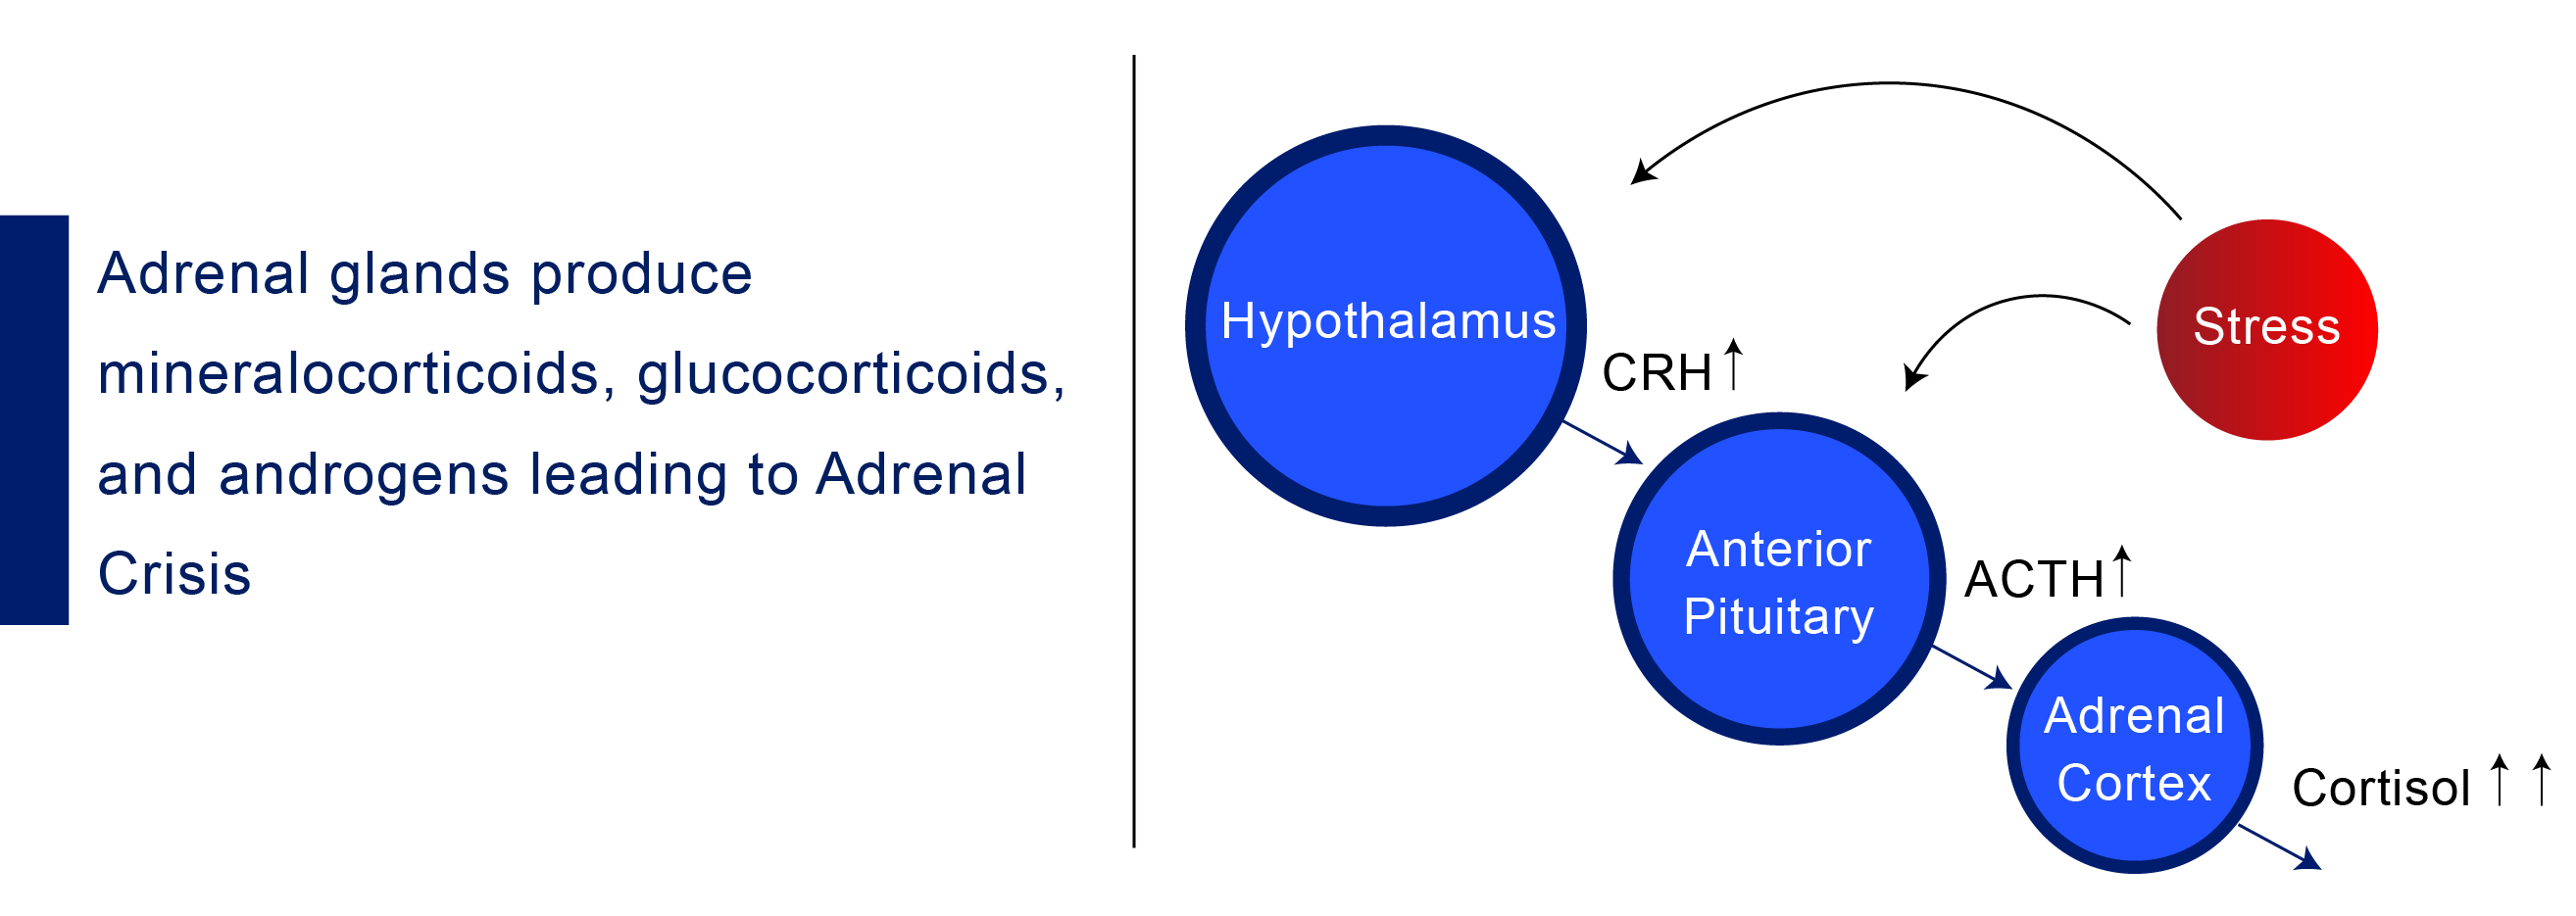 corticoids-production-leading-to-adrenal-crisis